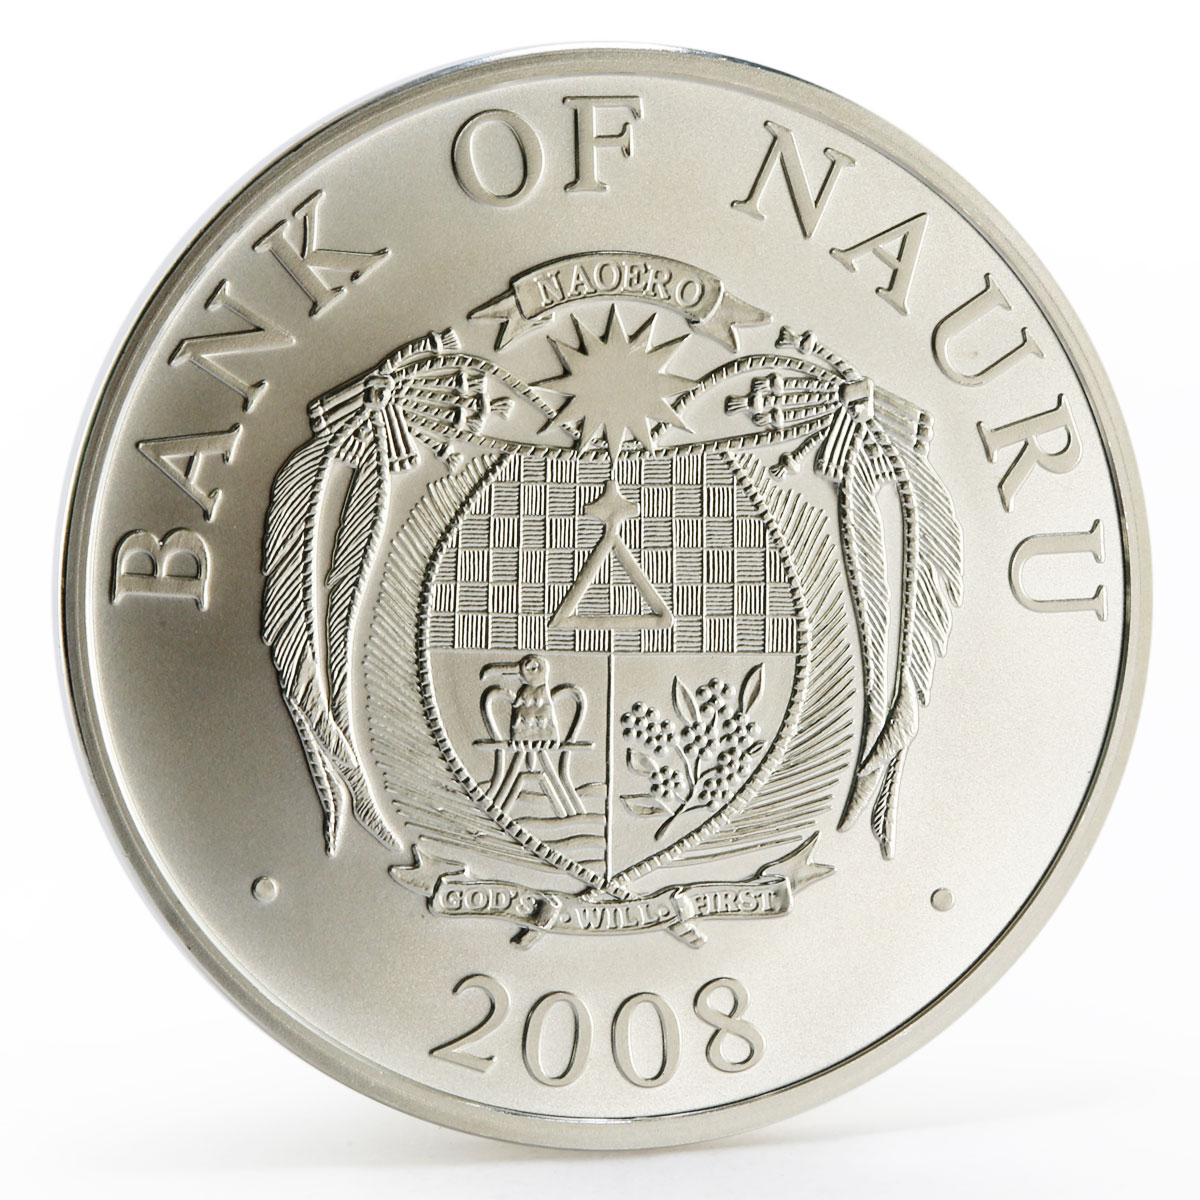 Nauru 10 dollars Happy New Year series Father Frost colored silver coin 2008